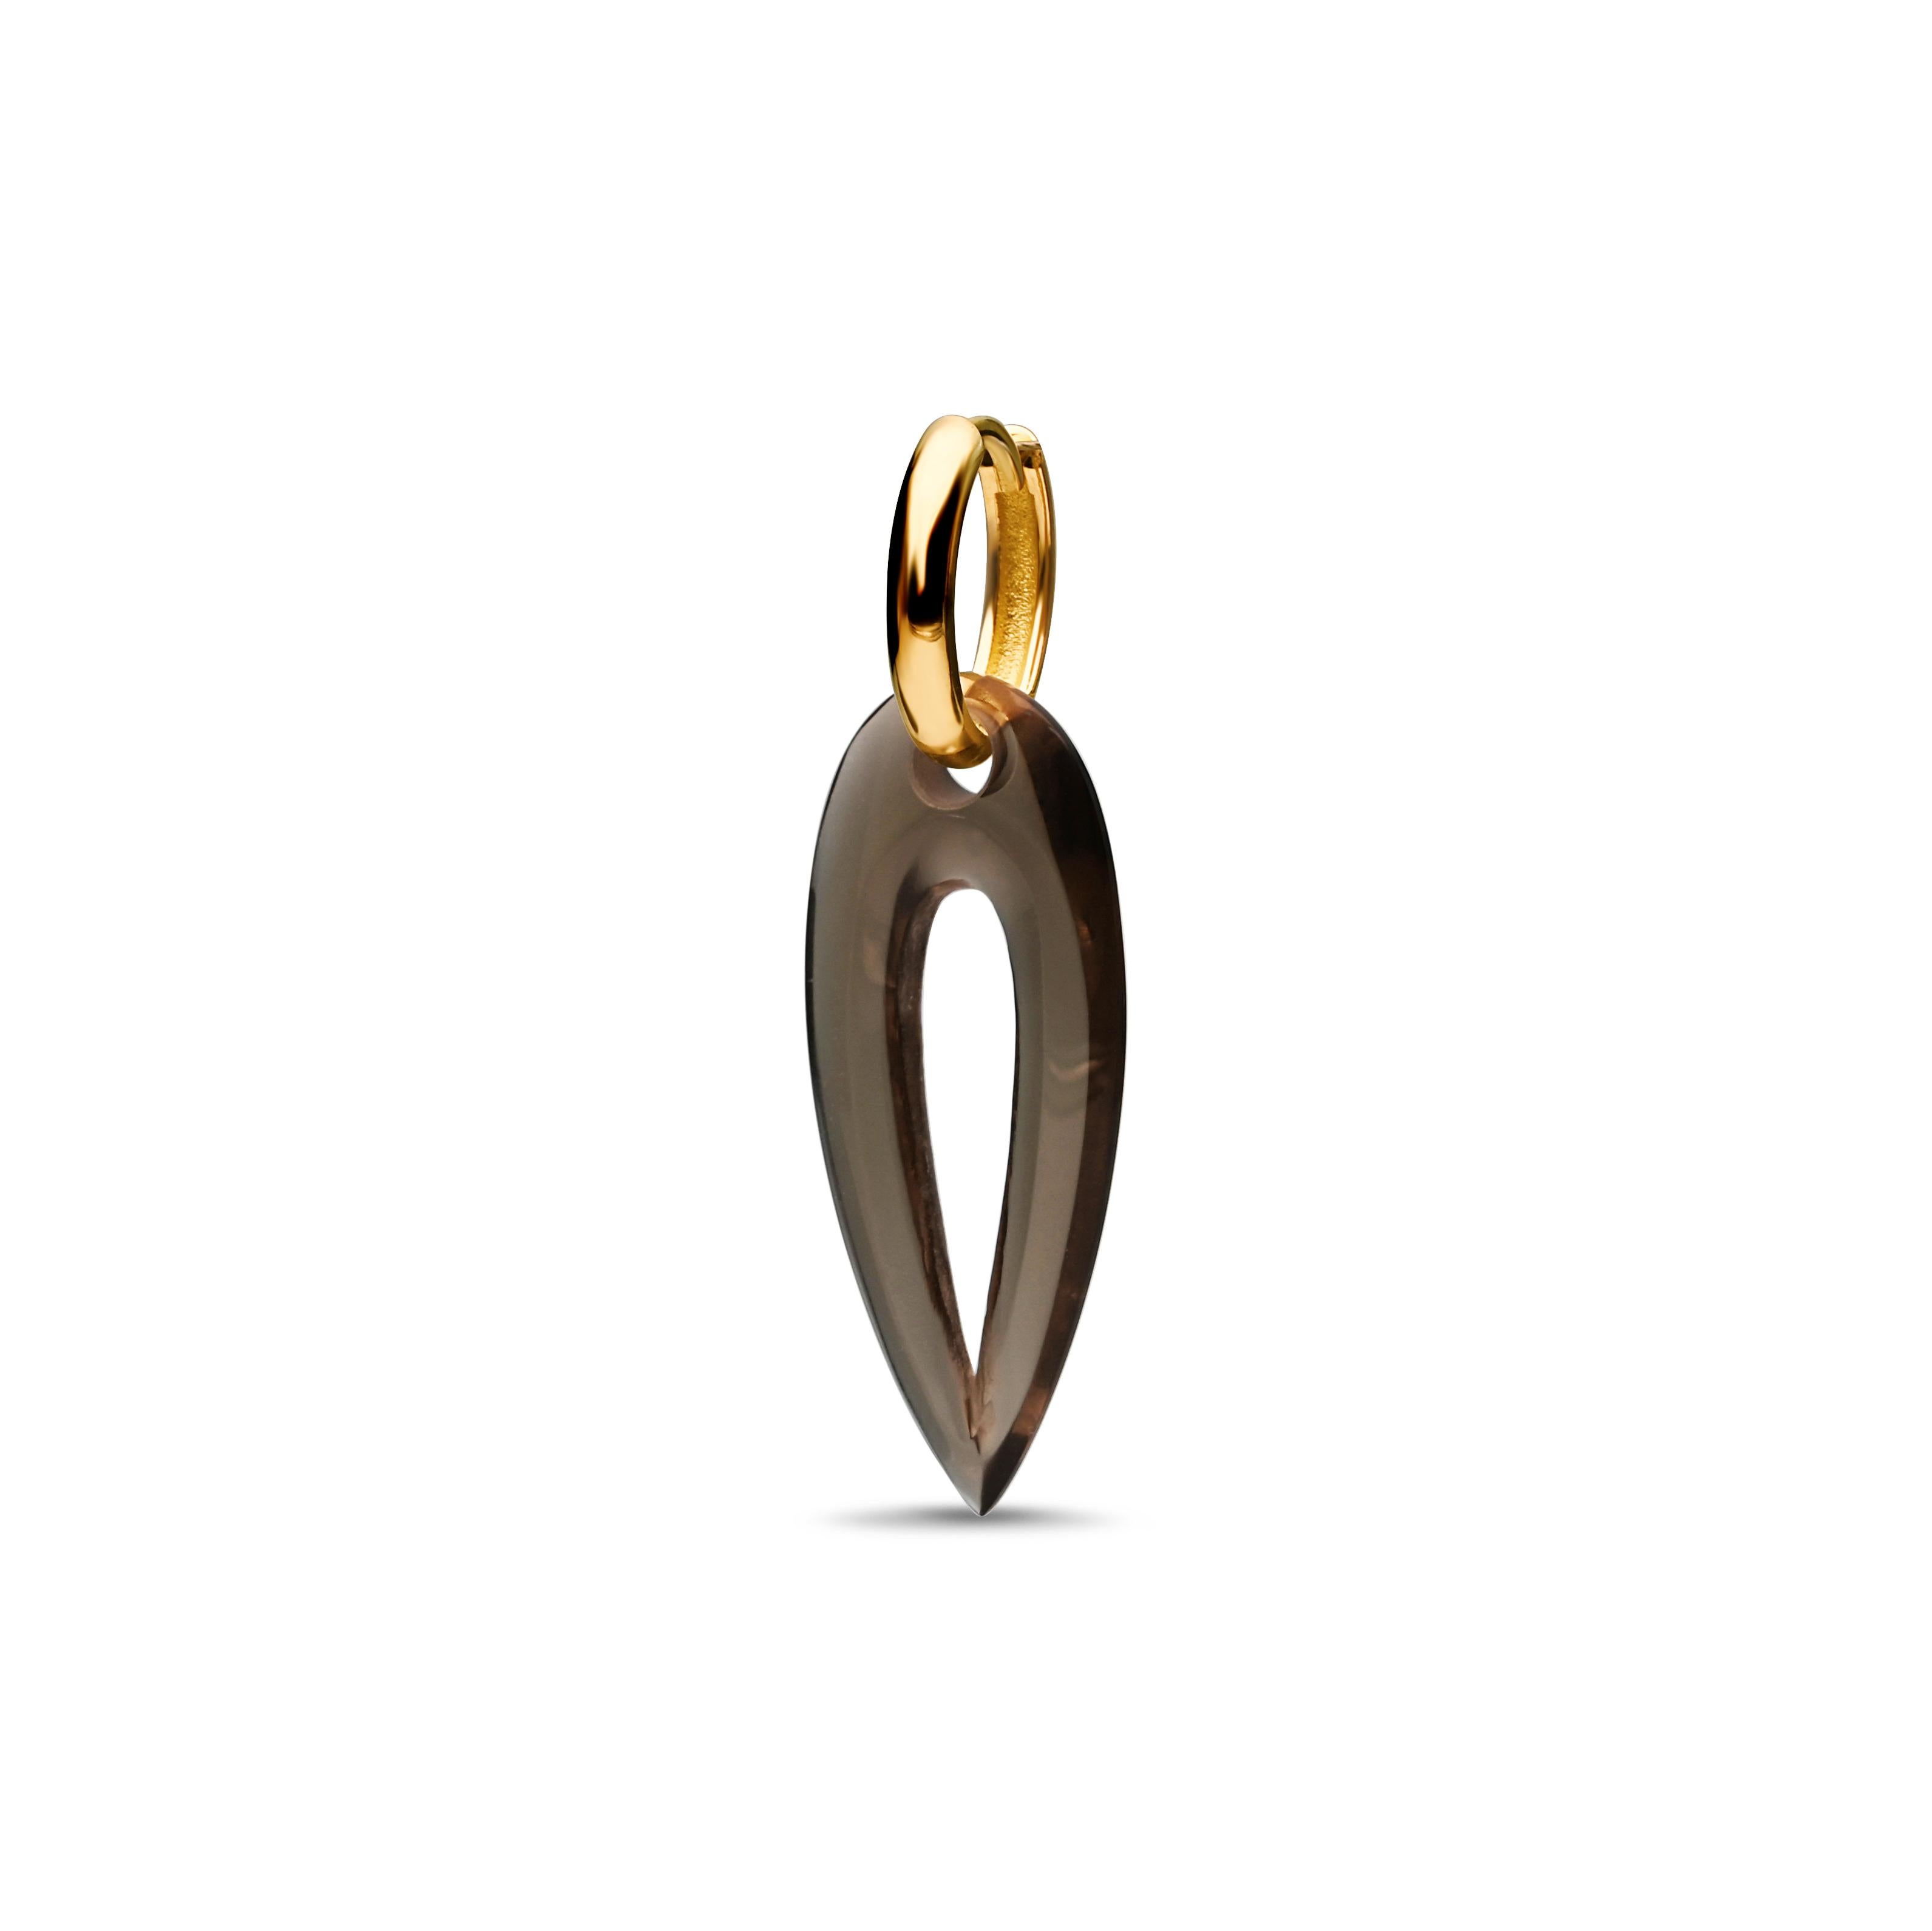 Hand cut smokey topaz  Medium Seeker drops hang gently from 18K gold custom made huggie hoop. Earrings are light for everyday wear, and a perfect choice for day-to-night styling. 

Seeker Earrings symbolize the spirit of exploration and the pursuit